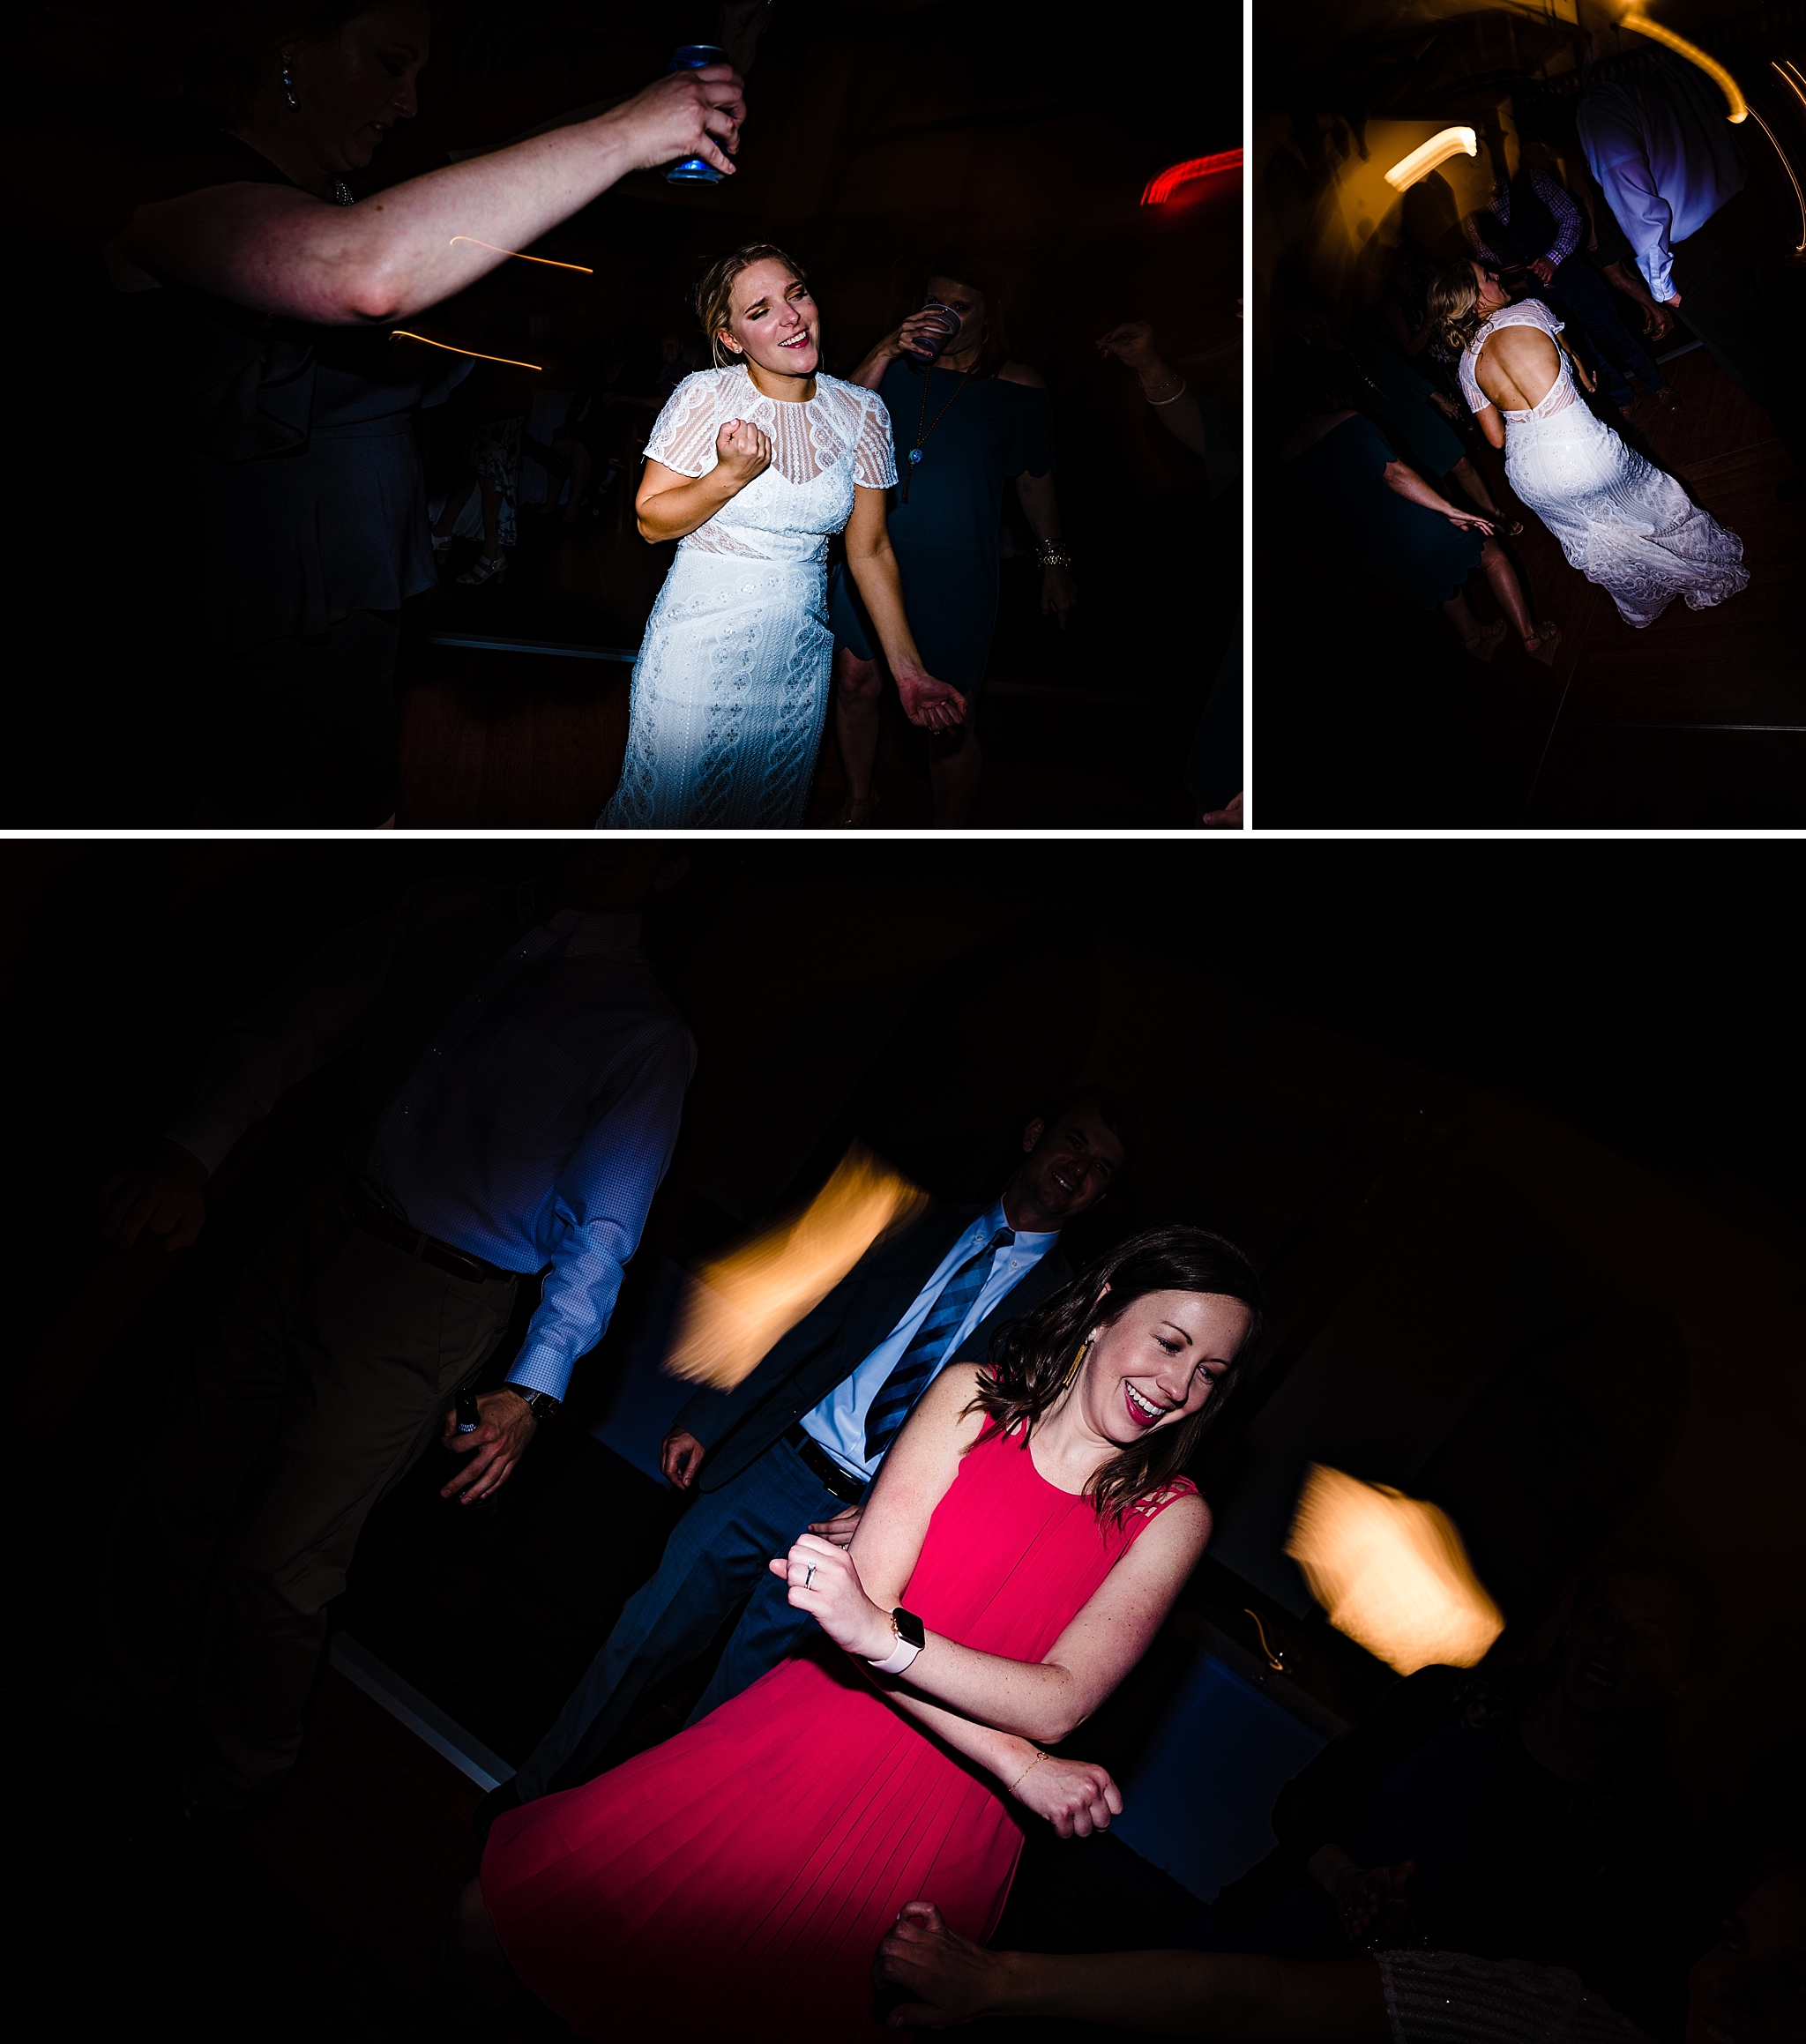 The bride and guests tear up the dance floor at All Saints Chapel in Raleigh, NC